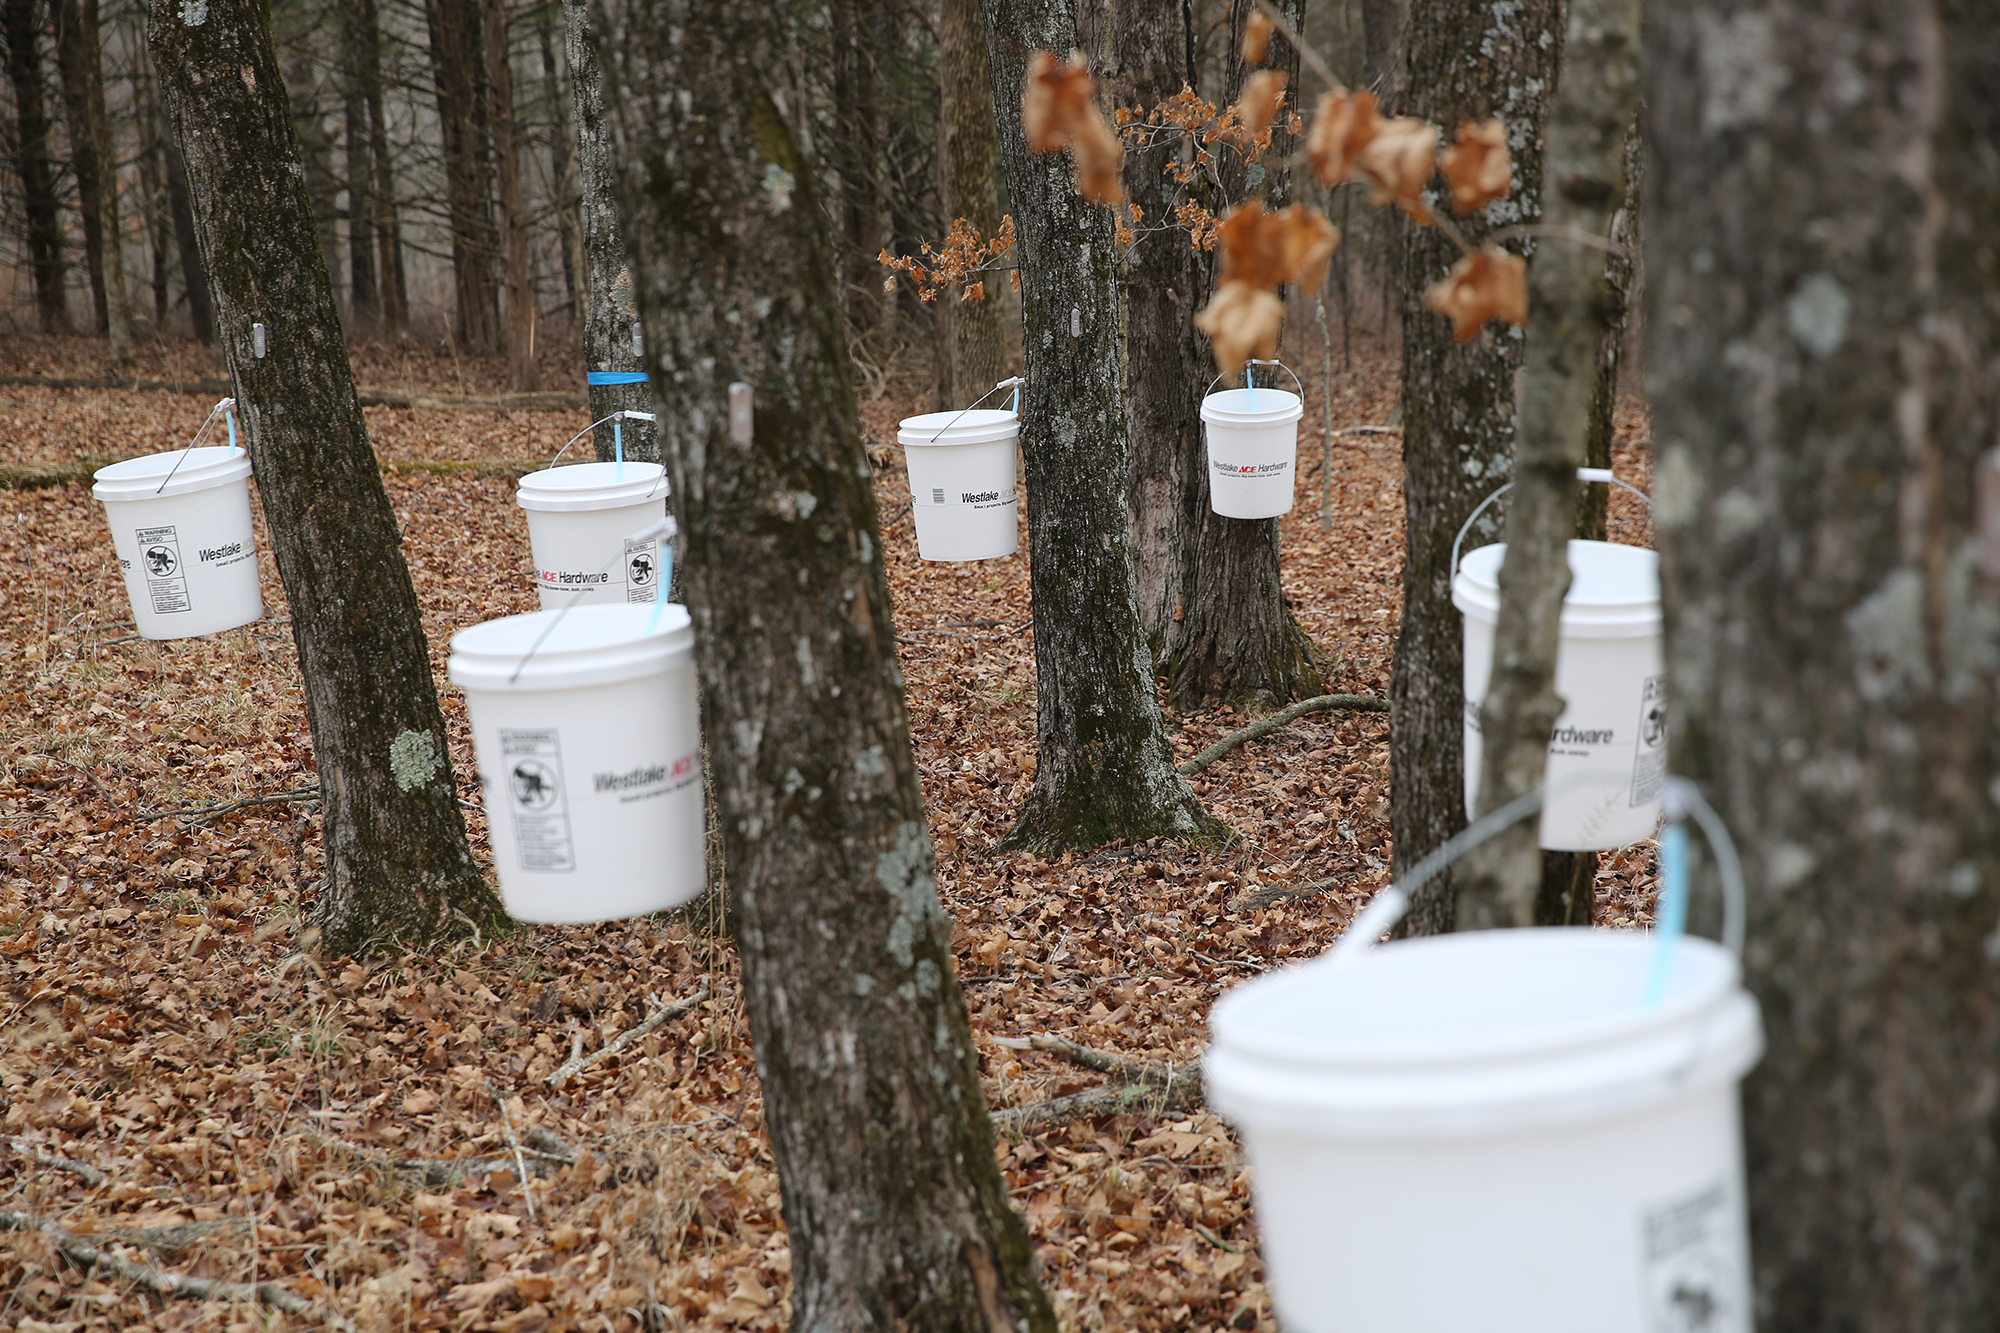 white buckets hang from trees in a forest